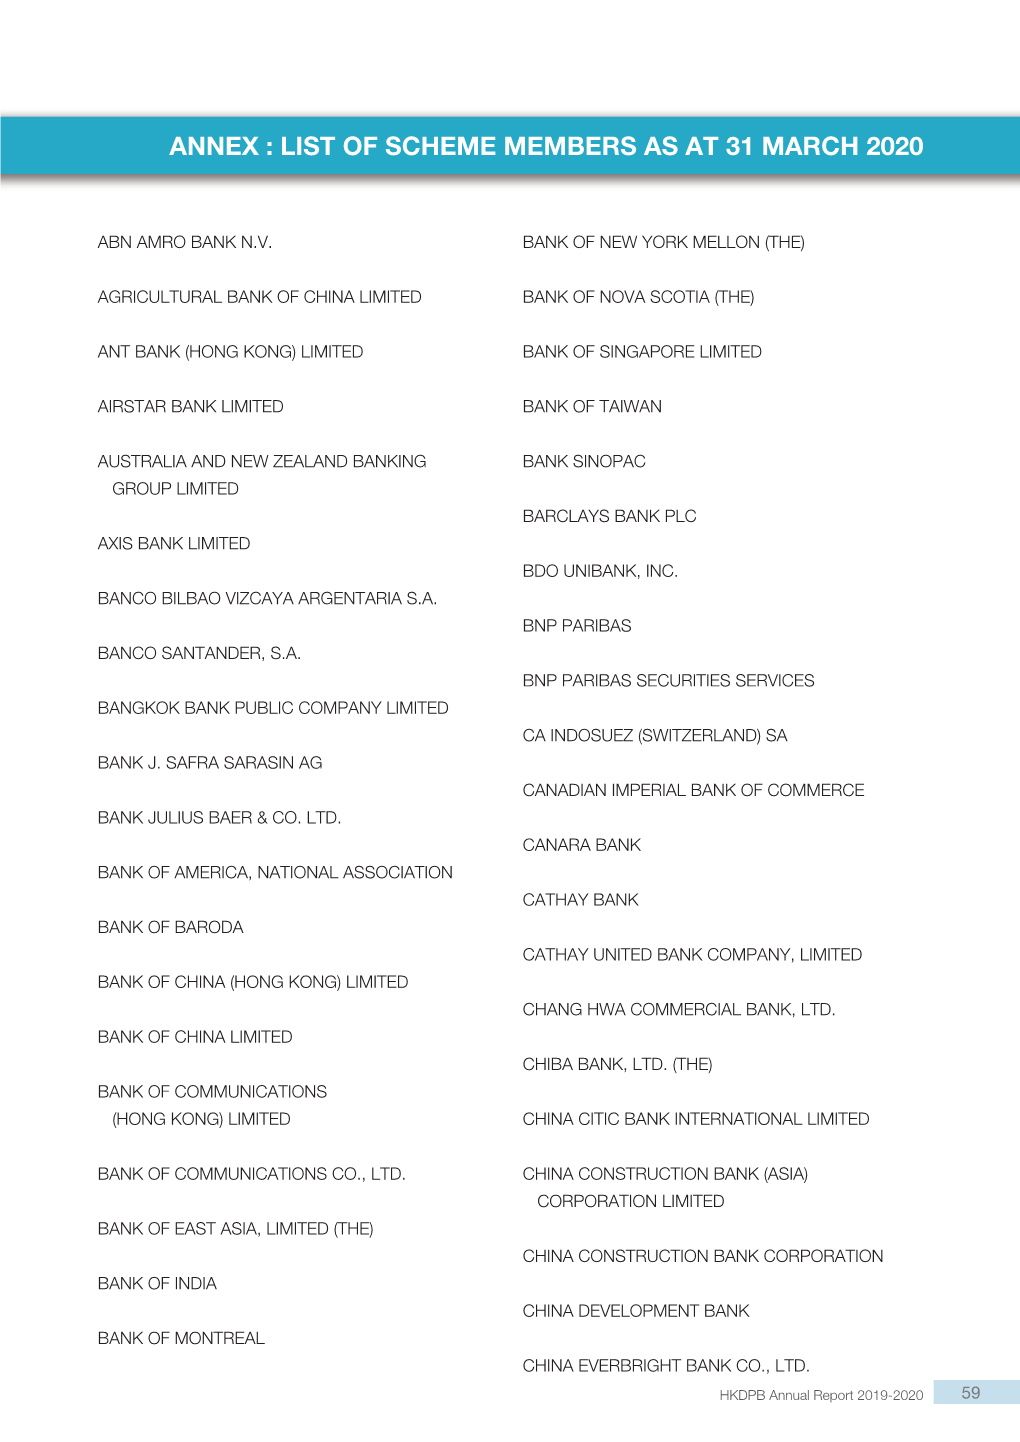 Annex : List of Scheme Members As at 31 March 2020